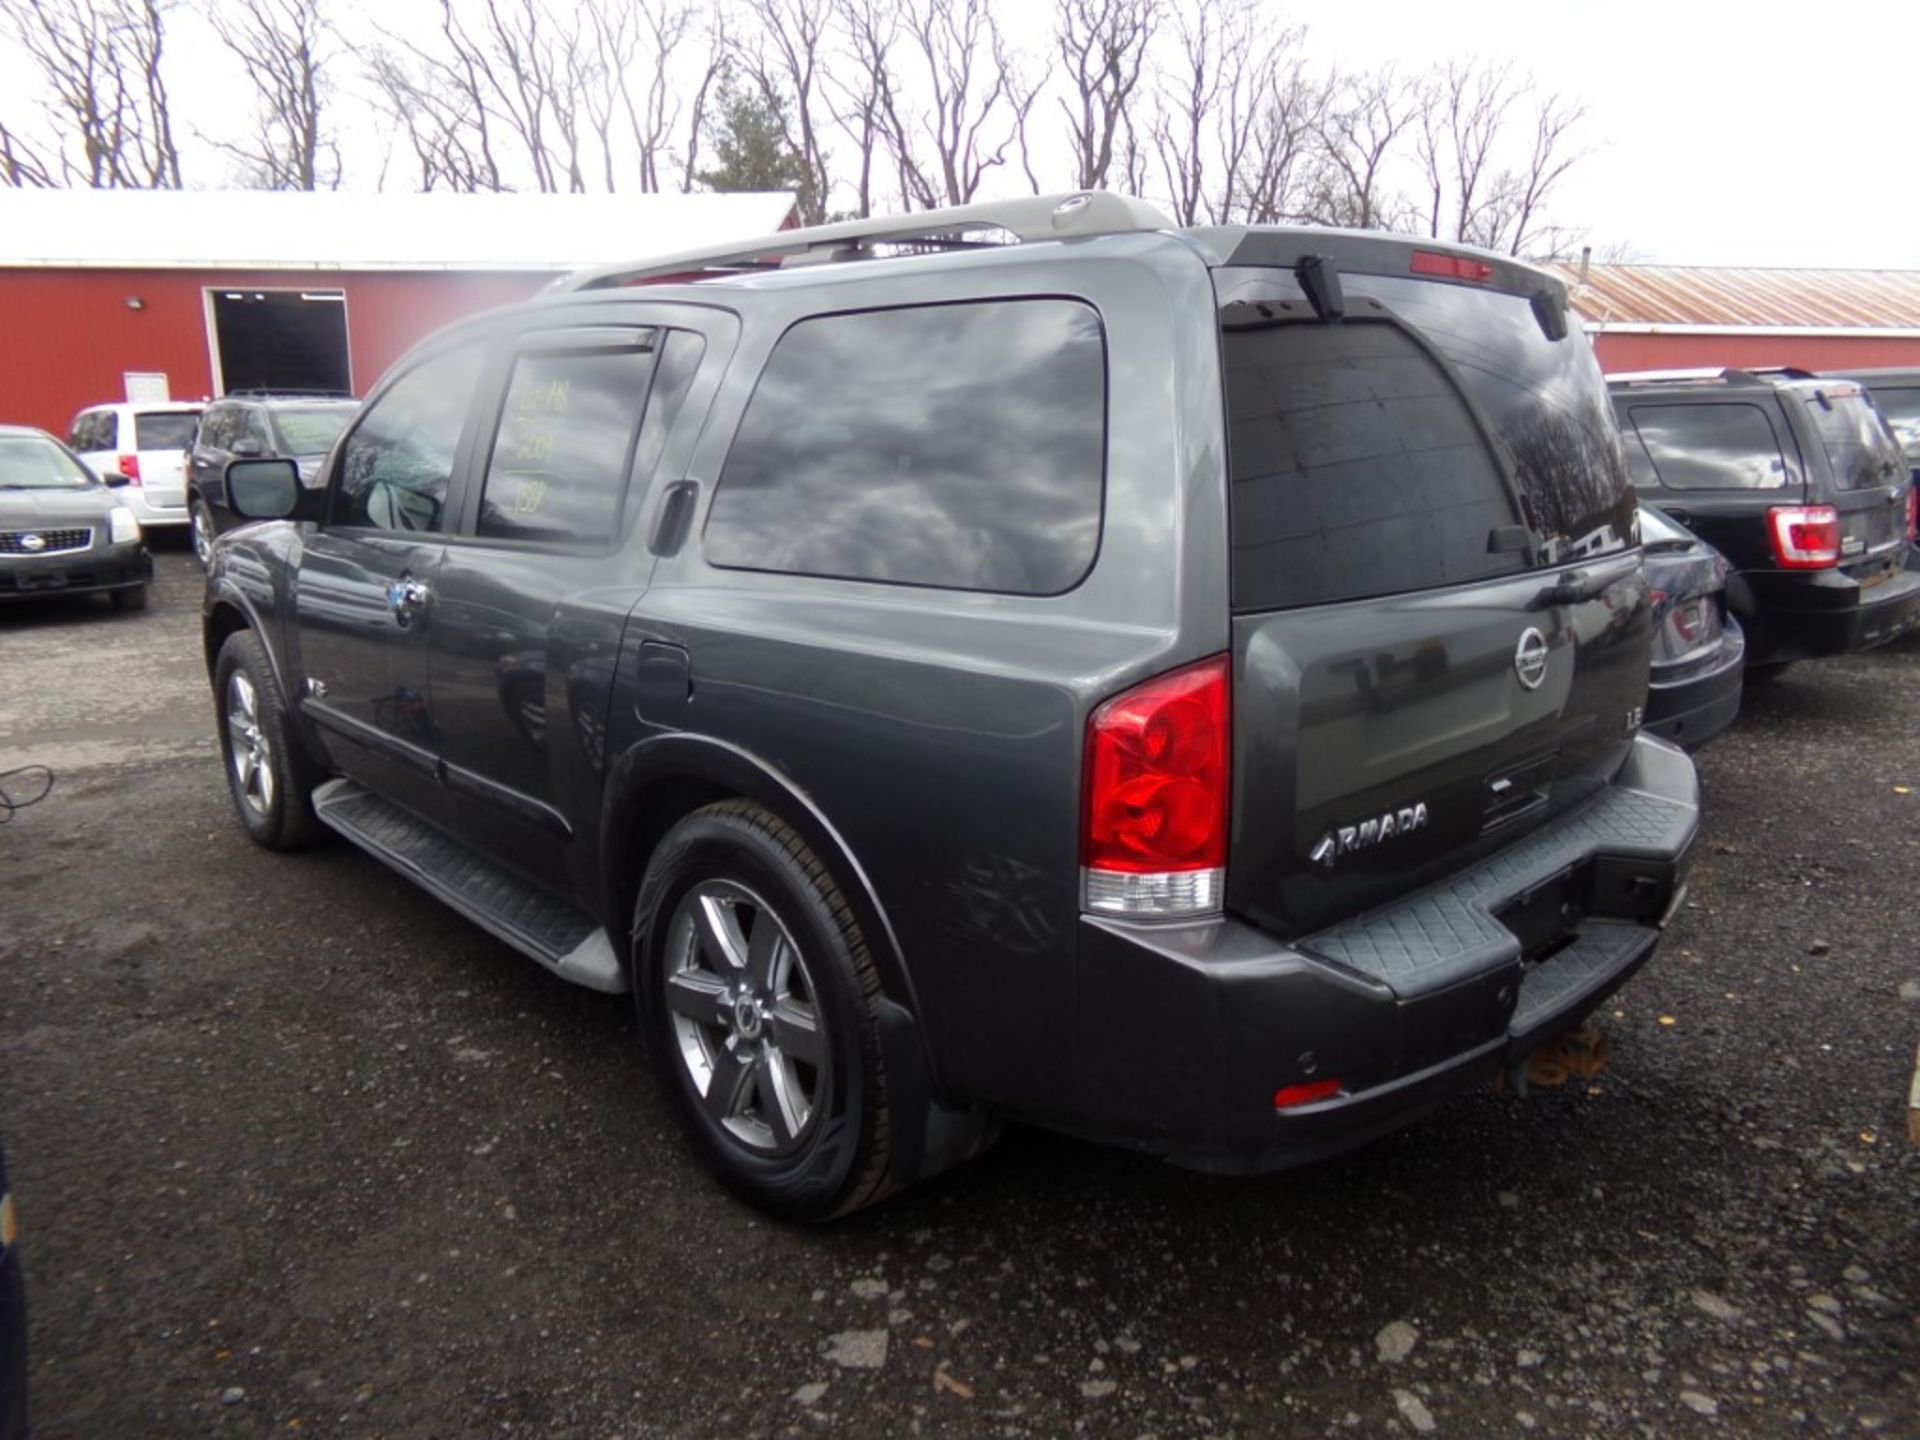 2009 Nissan Armada LE 4X4, Leather, Sunroof, 3rd Row Seating, Grey, 158,581 Miles, VIN# - Image 3 of 13